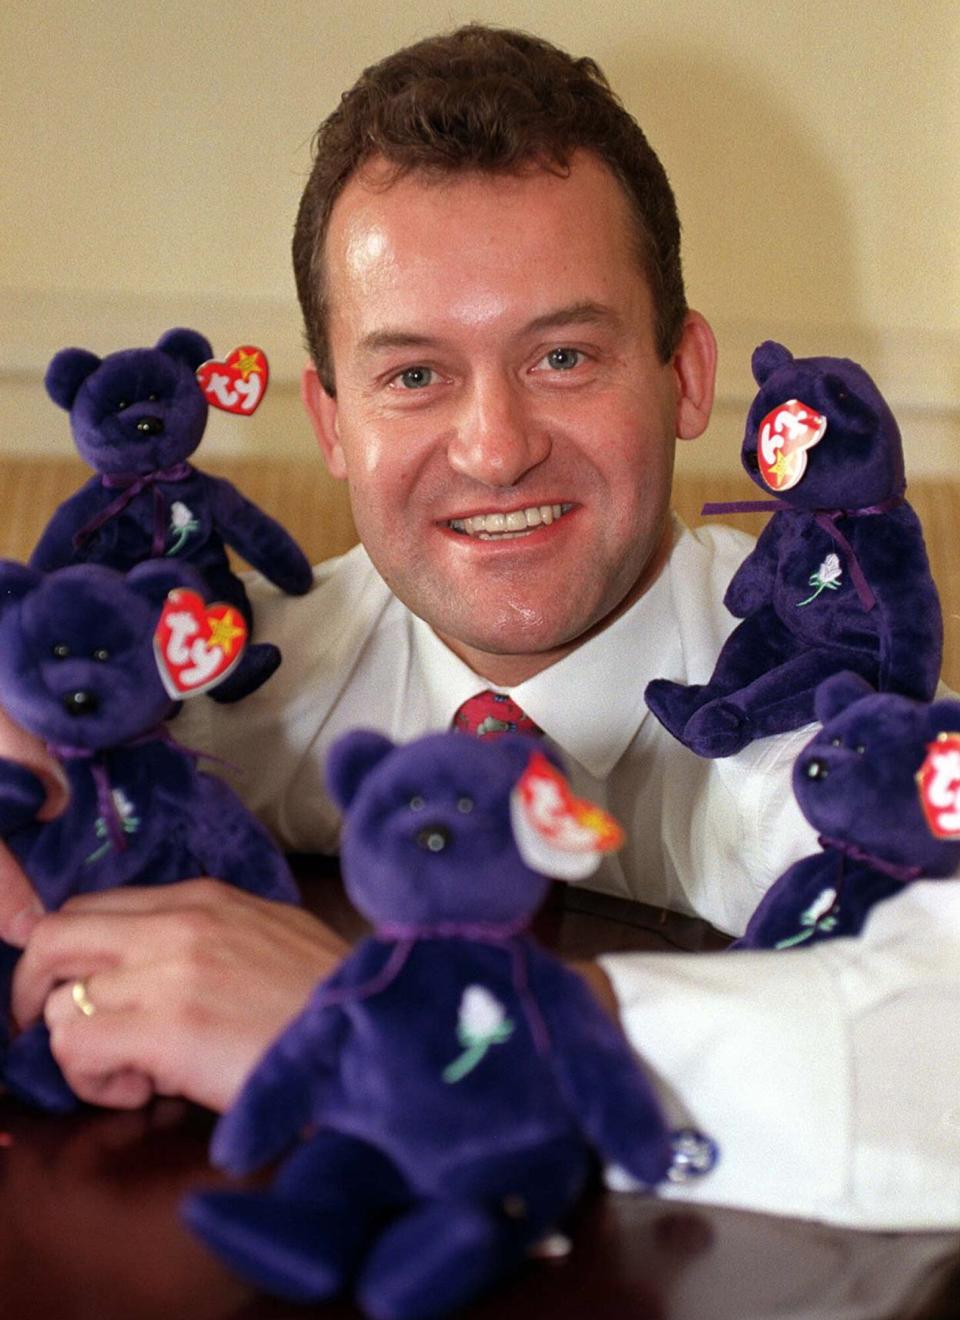 Paul Burrell, former butler to Diana, Princess of Wales, with the limited edition 'Princess Beanie Baby' teddy bears which were produced in her memory and have become one of the most sought after toys in the world.